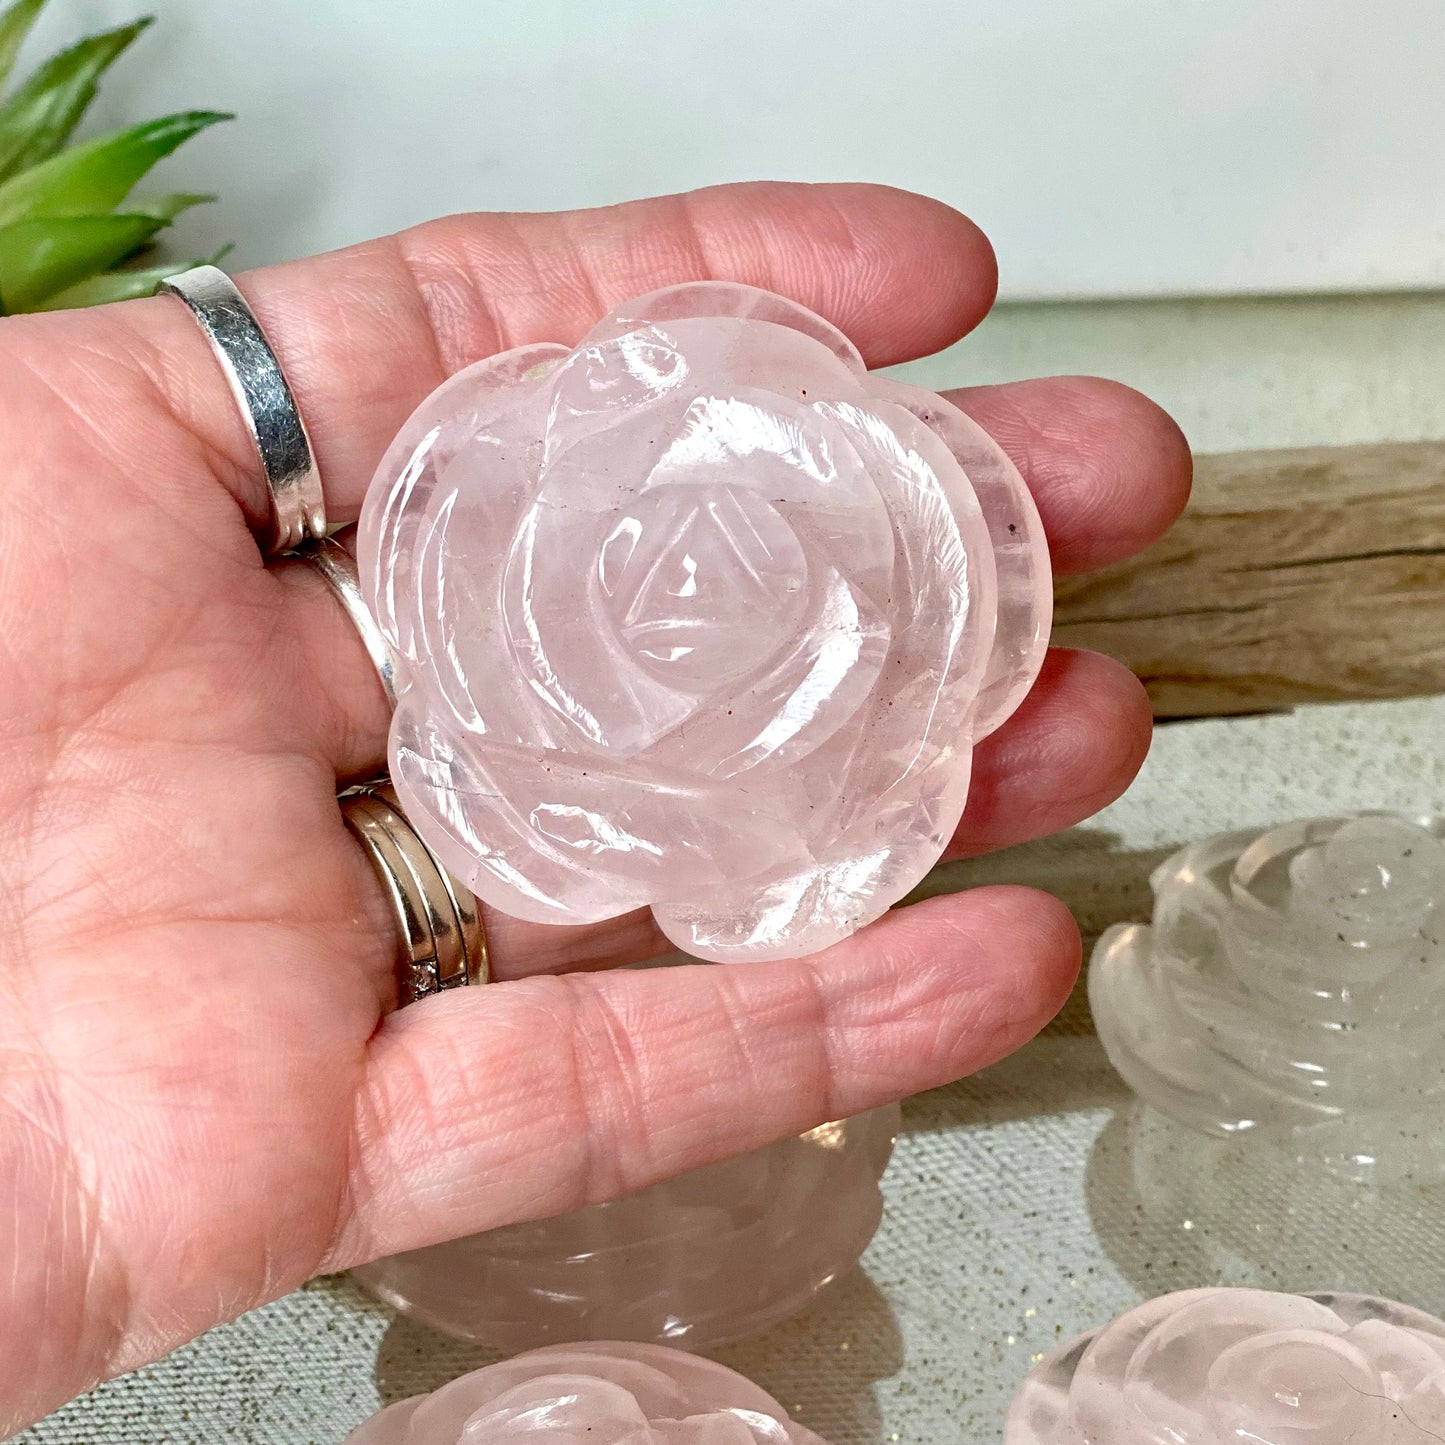 Radiant Love: Carved Heart Rose Quartz Crystal – Symbol of Compassion and Harmony